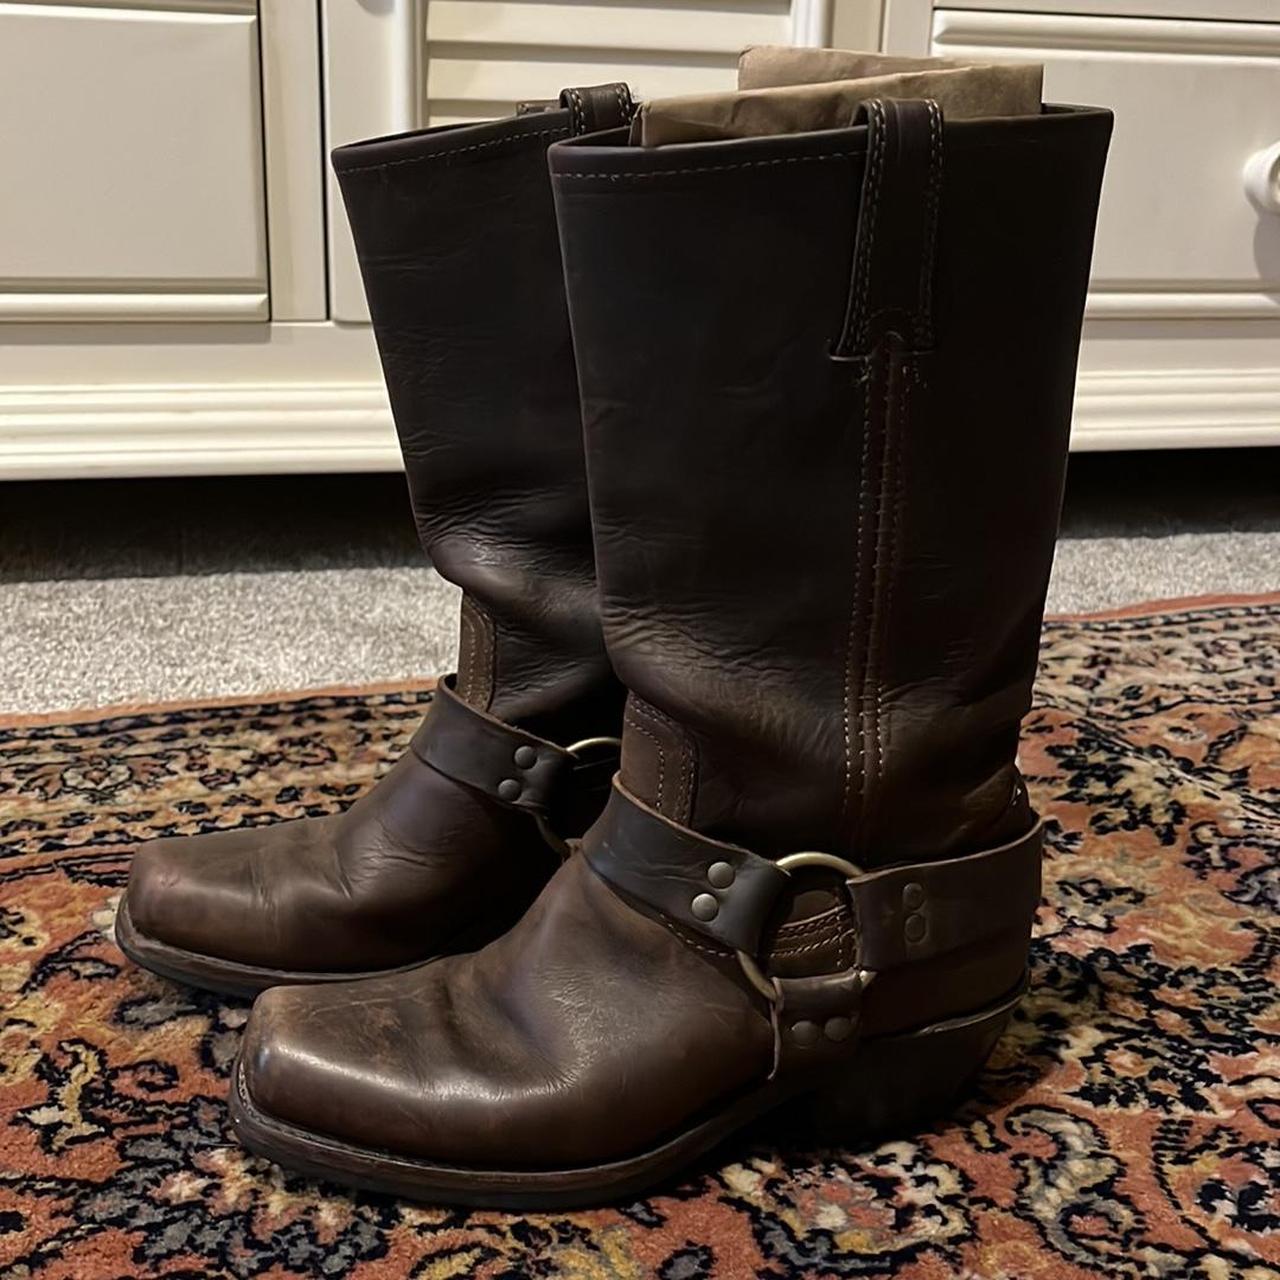 Frye Harness Boots - see photos for condition - Depop